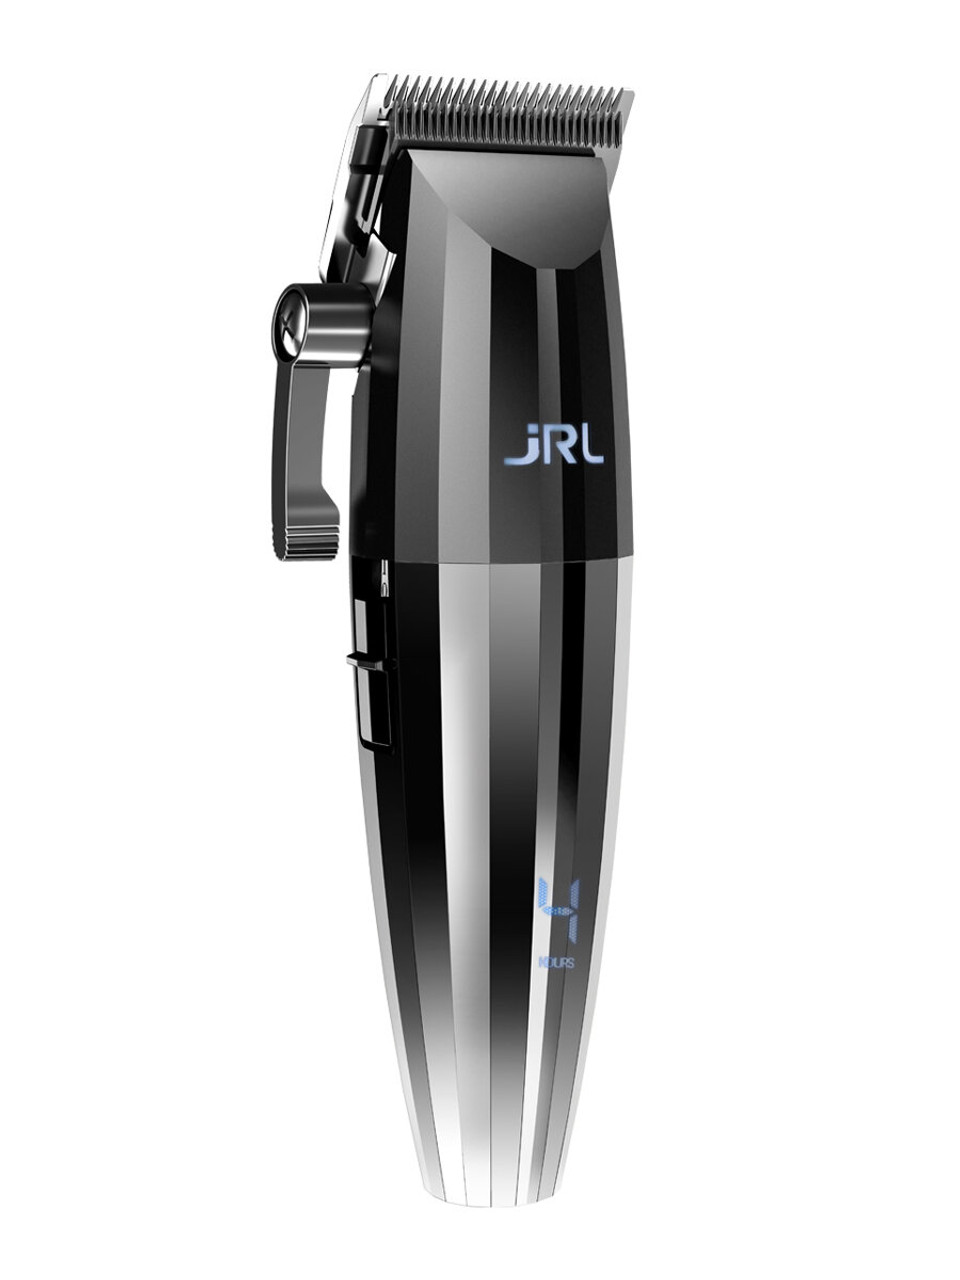   Series JRL FreshFade 2020T Trimmer - Professional Hair  Trimmer w/Cool Blade Technology for Men's Grooming - Rechargeable Trimmer  w/Stainless Steel Blades and Corrosion Proof (Silver) : Beauty & Personal  Care